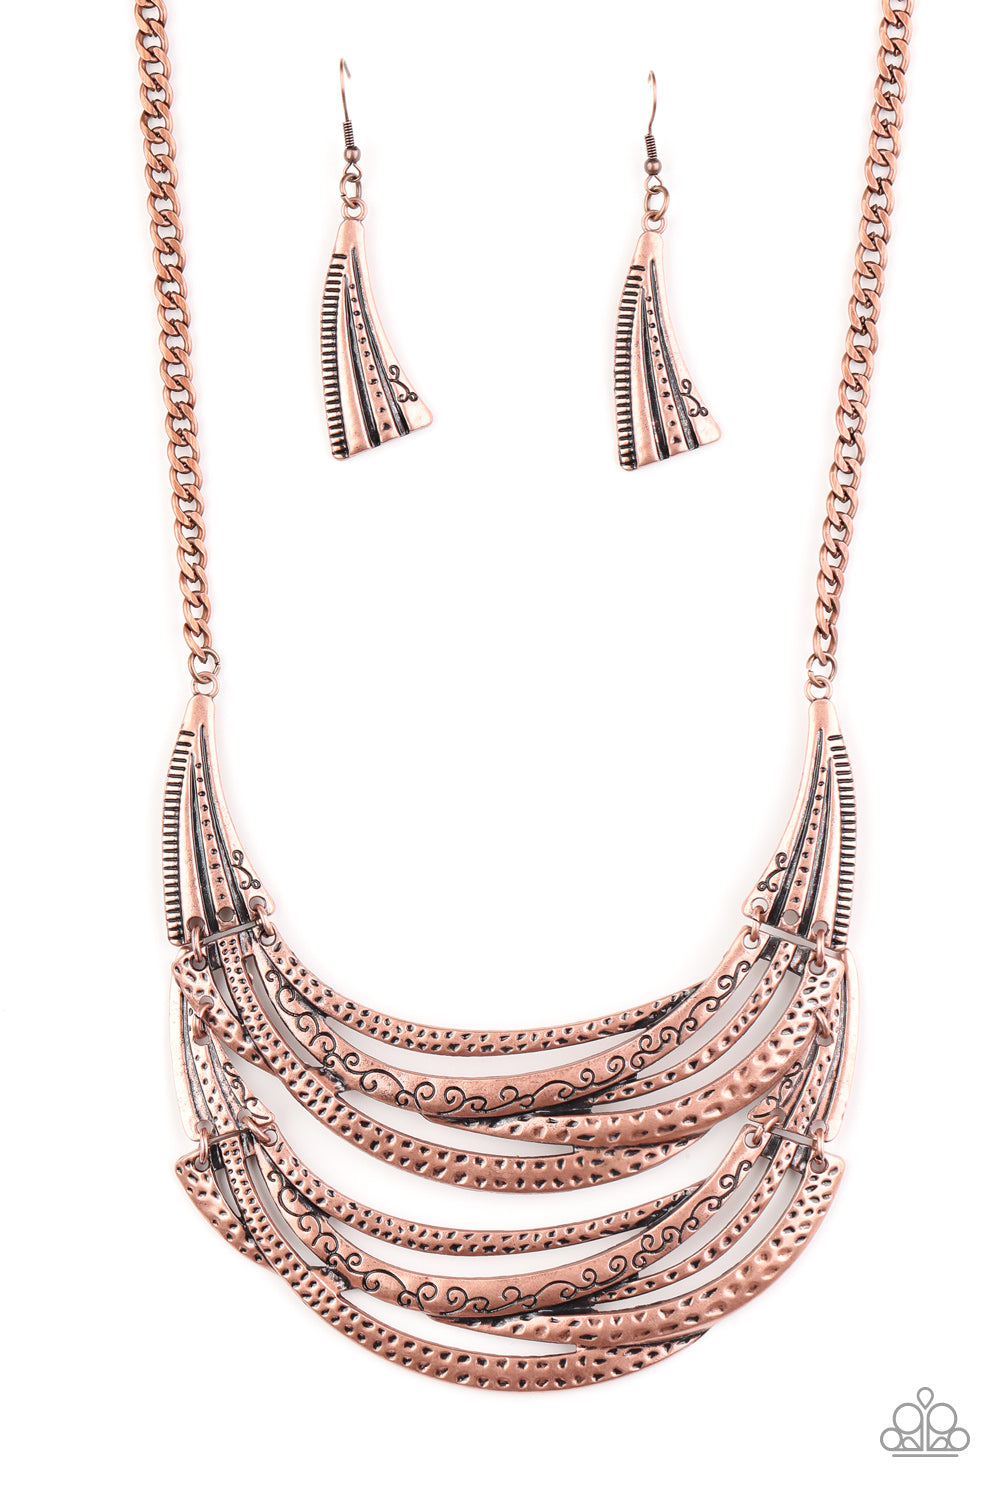 Read Between The VINES Copper Necklace - Paparazzi Accessories